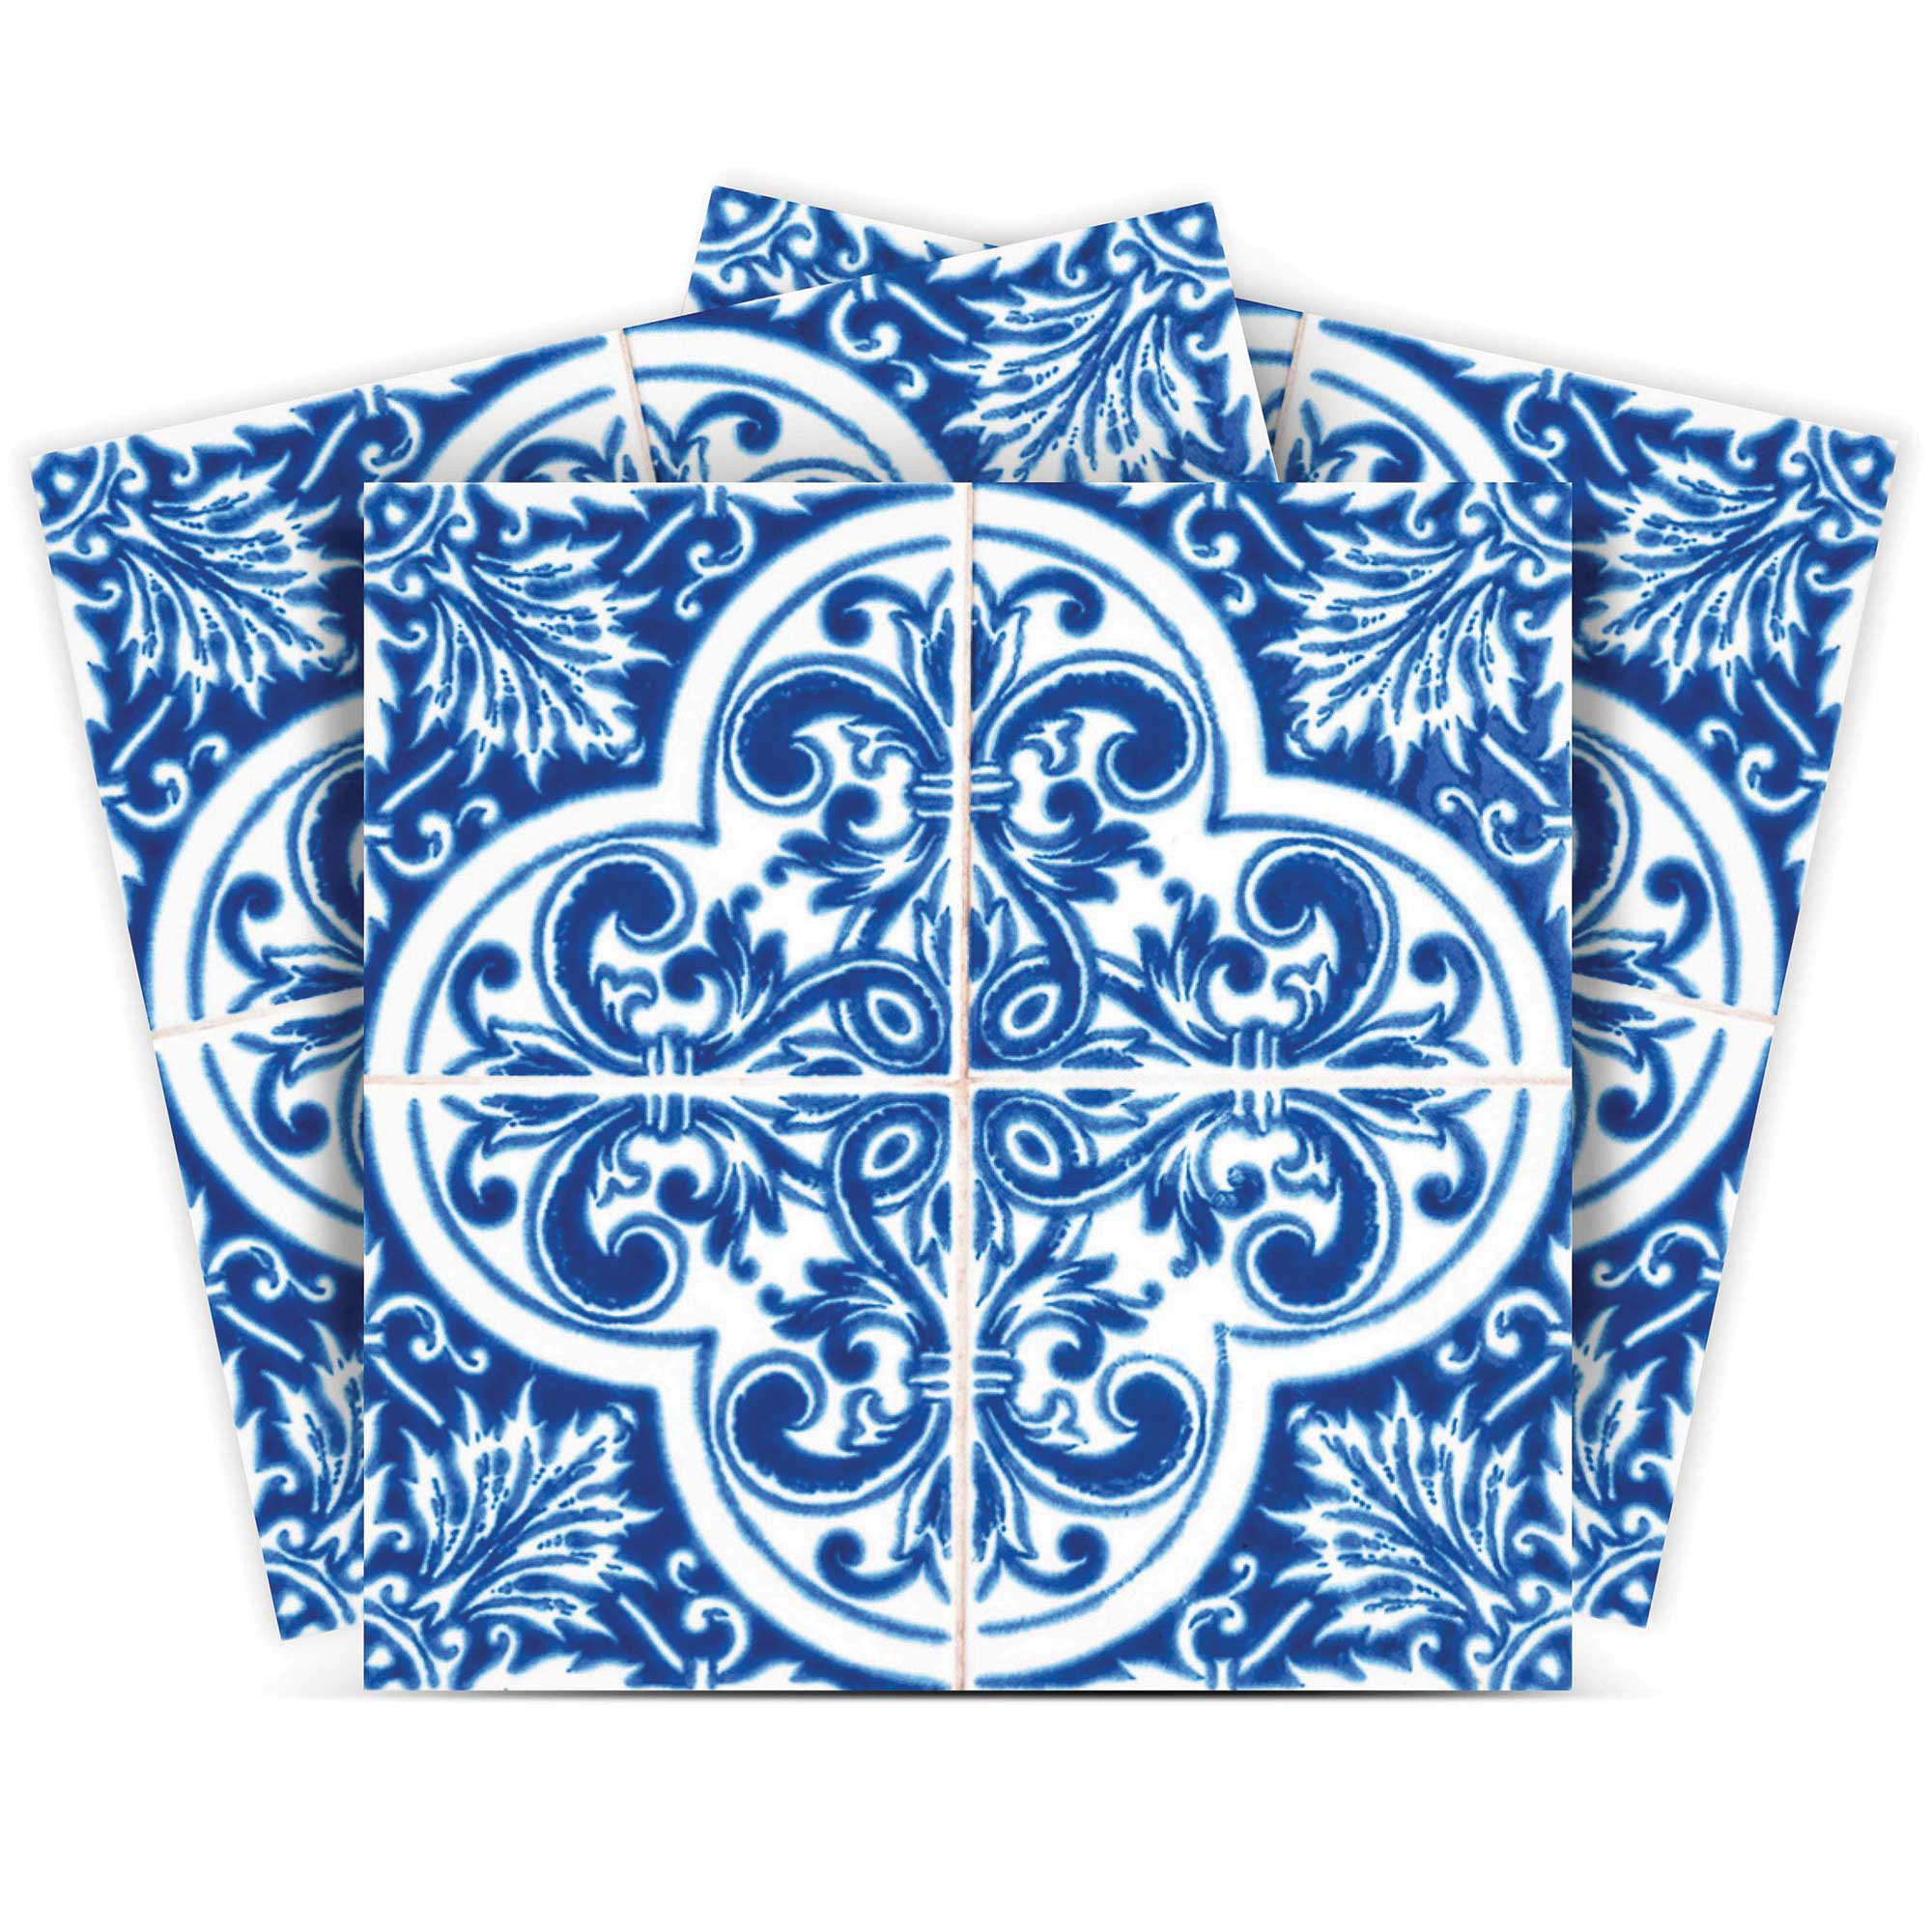 7" X 7" Blue and White Cross Peel And Stick Tiles-400118-1